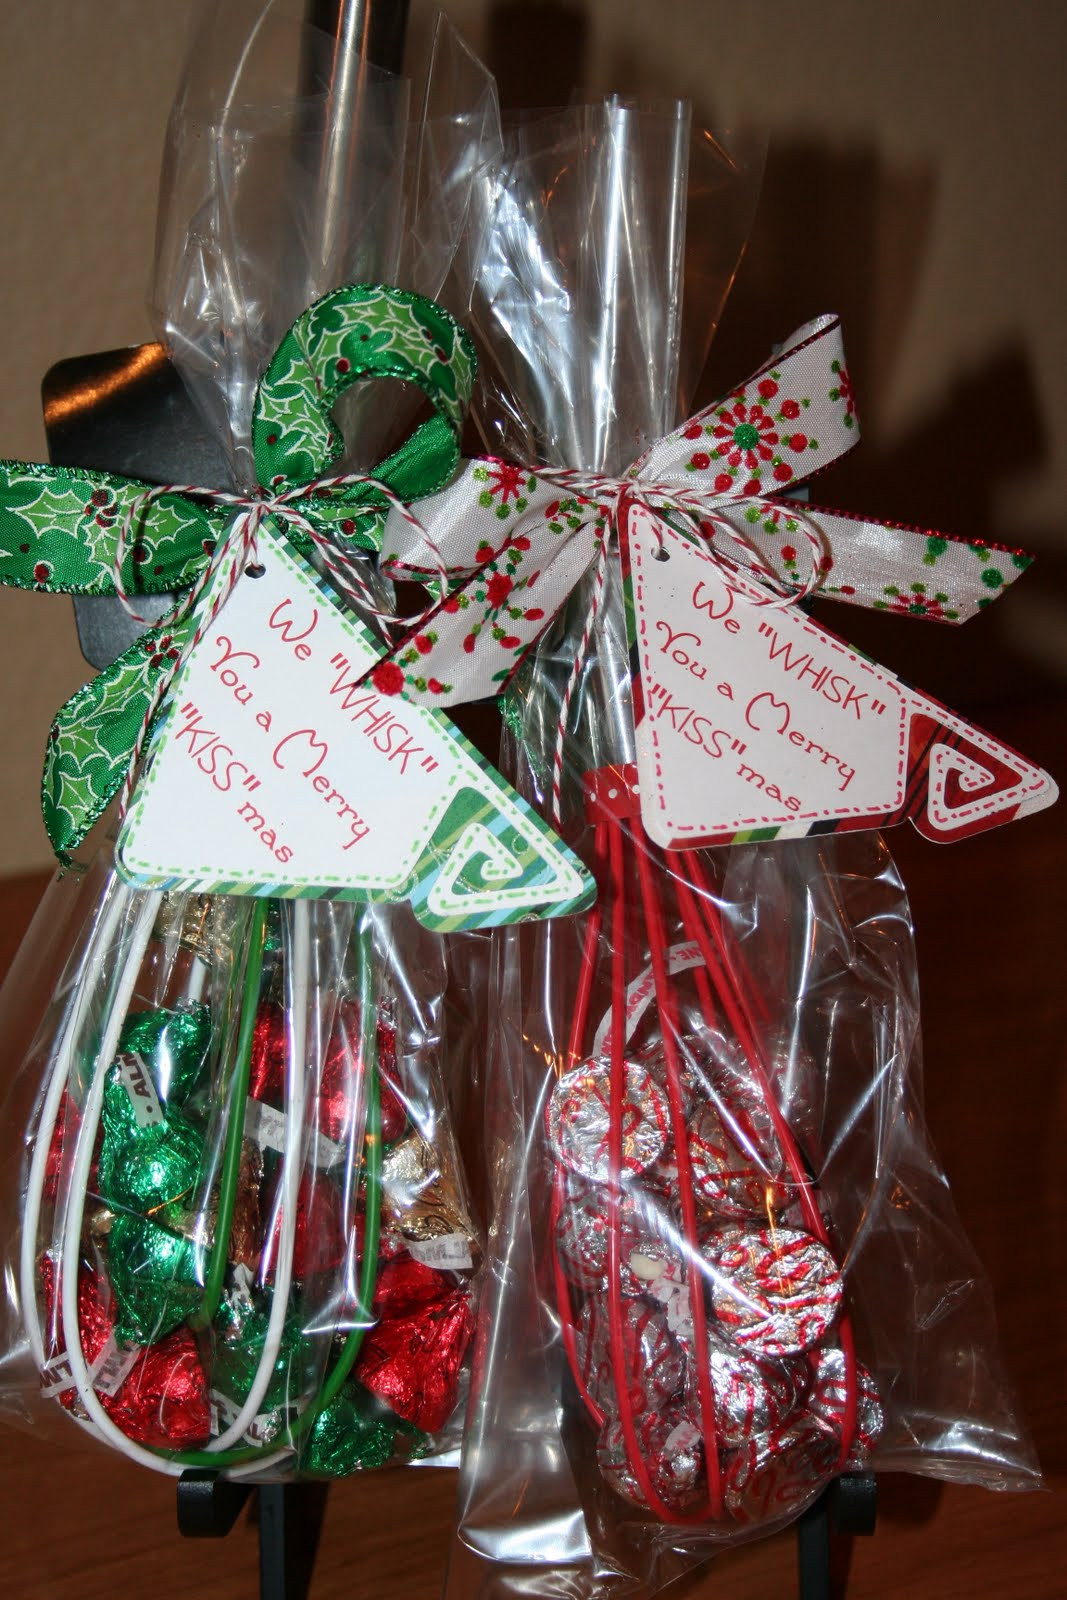 Holiday Candy Gift Ideas
 For The Joy of Creating Merry "Kiss"mas 12 Days of Christmas